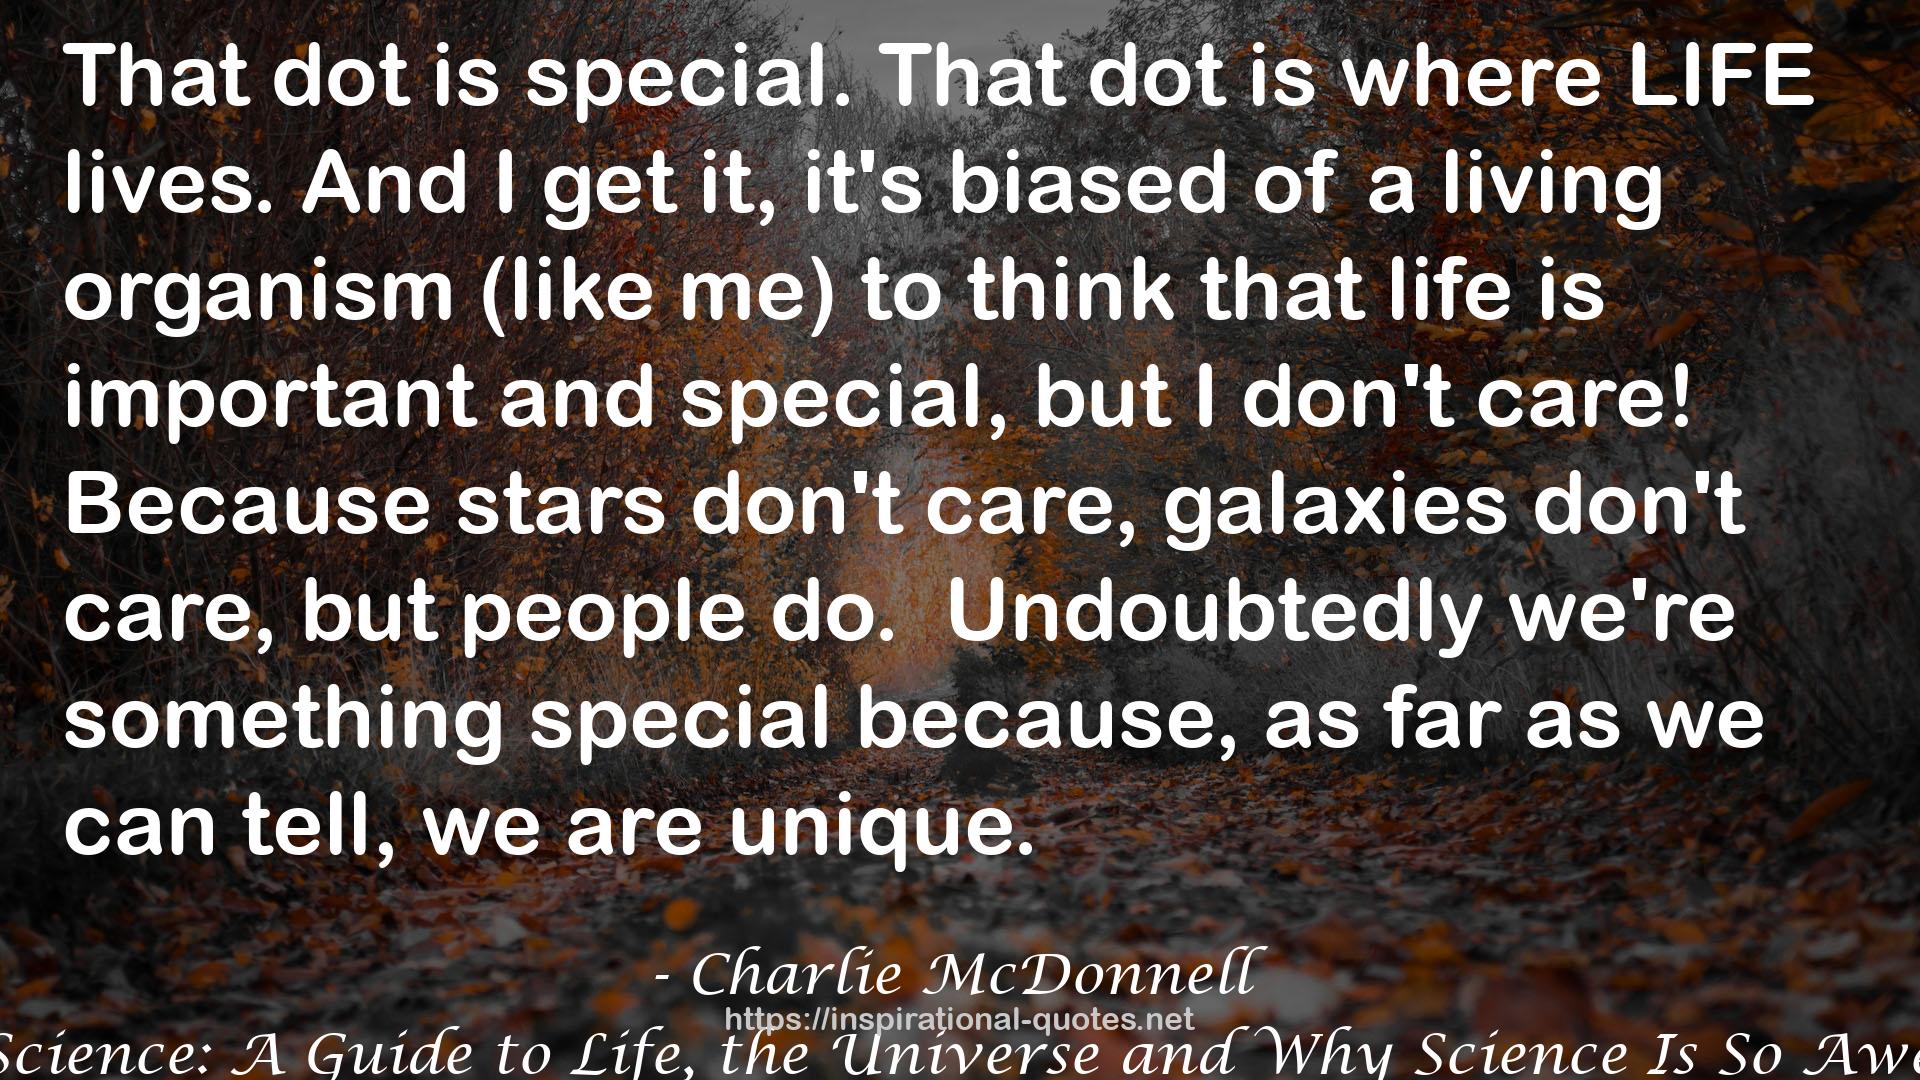 Charlie McDonnell QUOTES